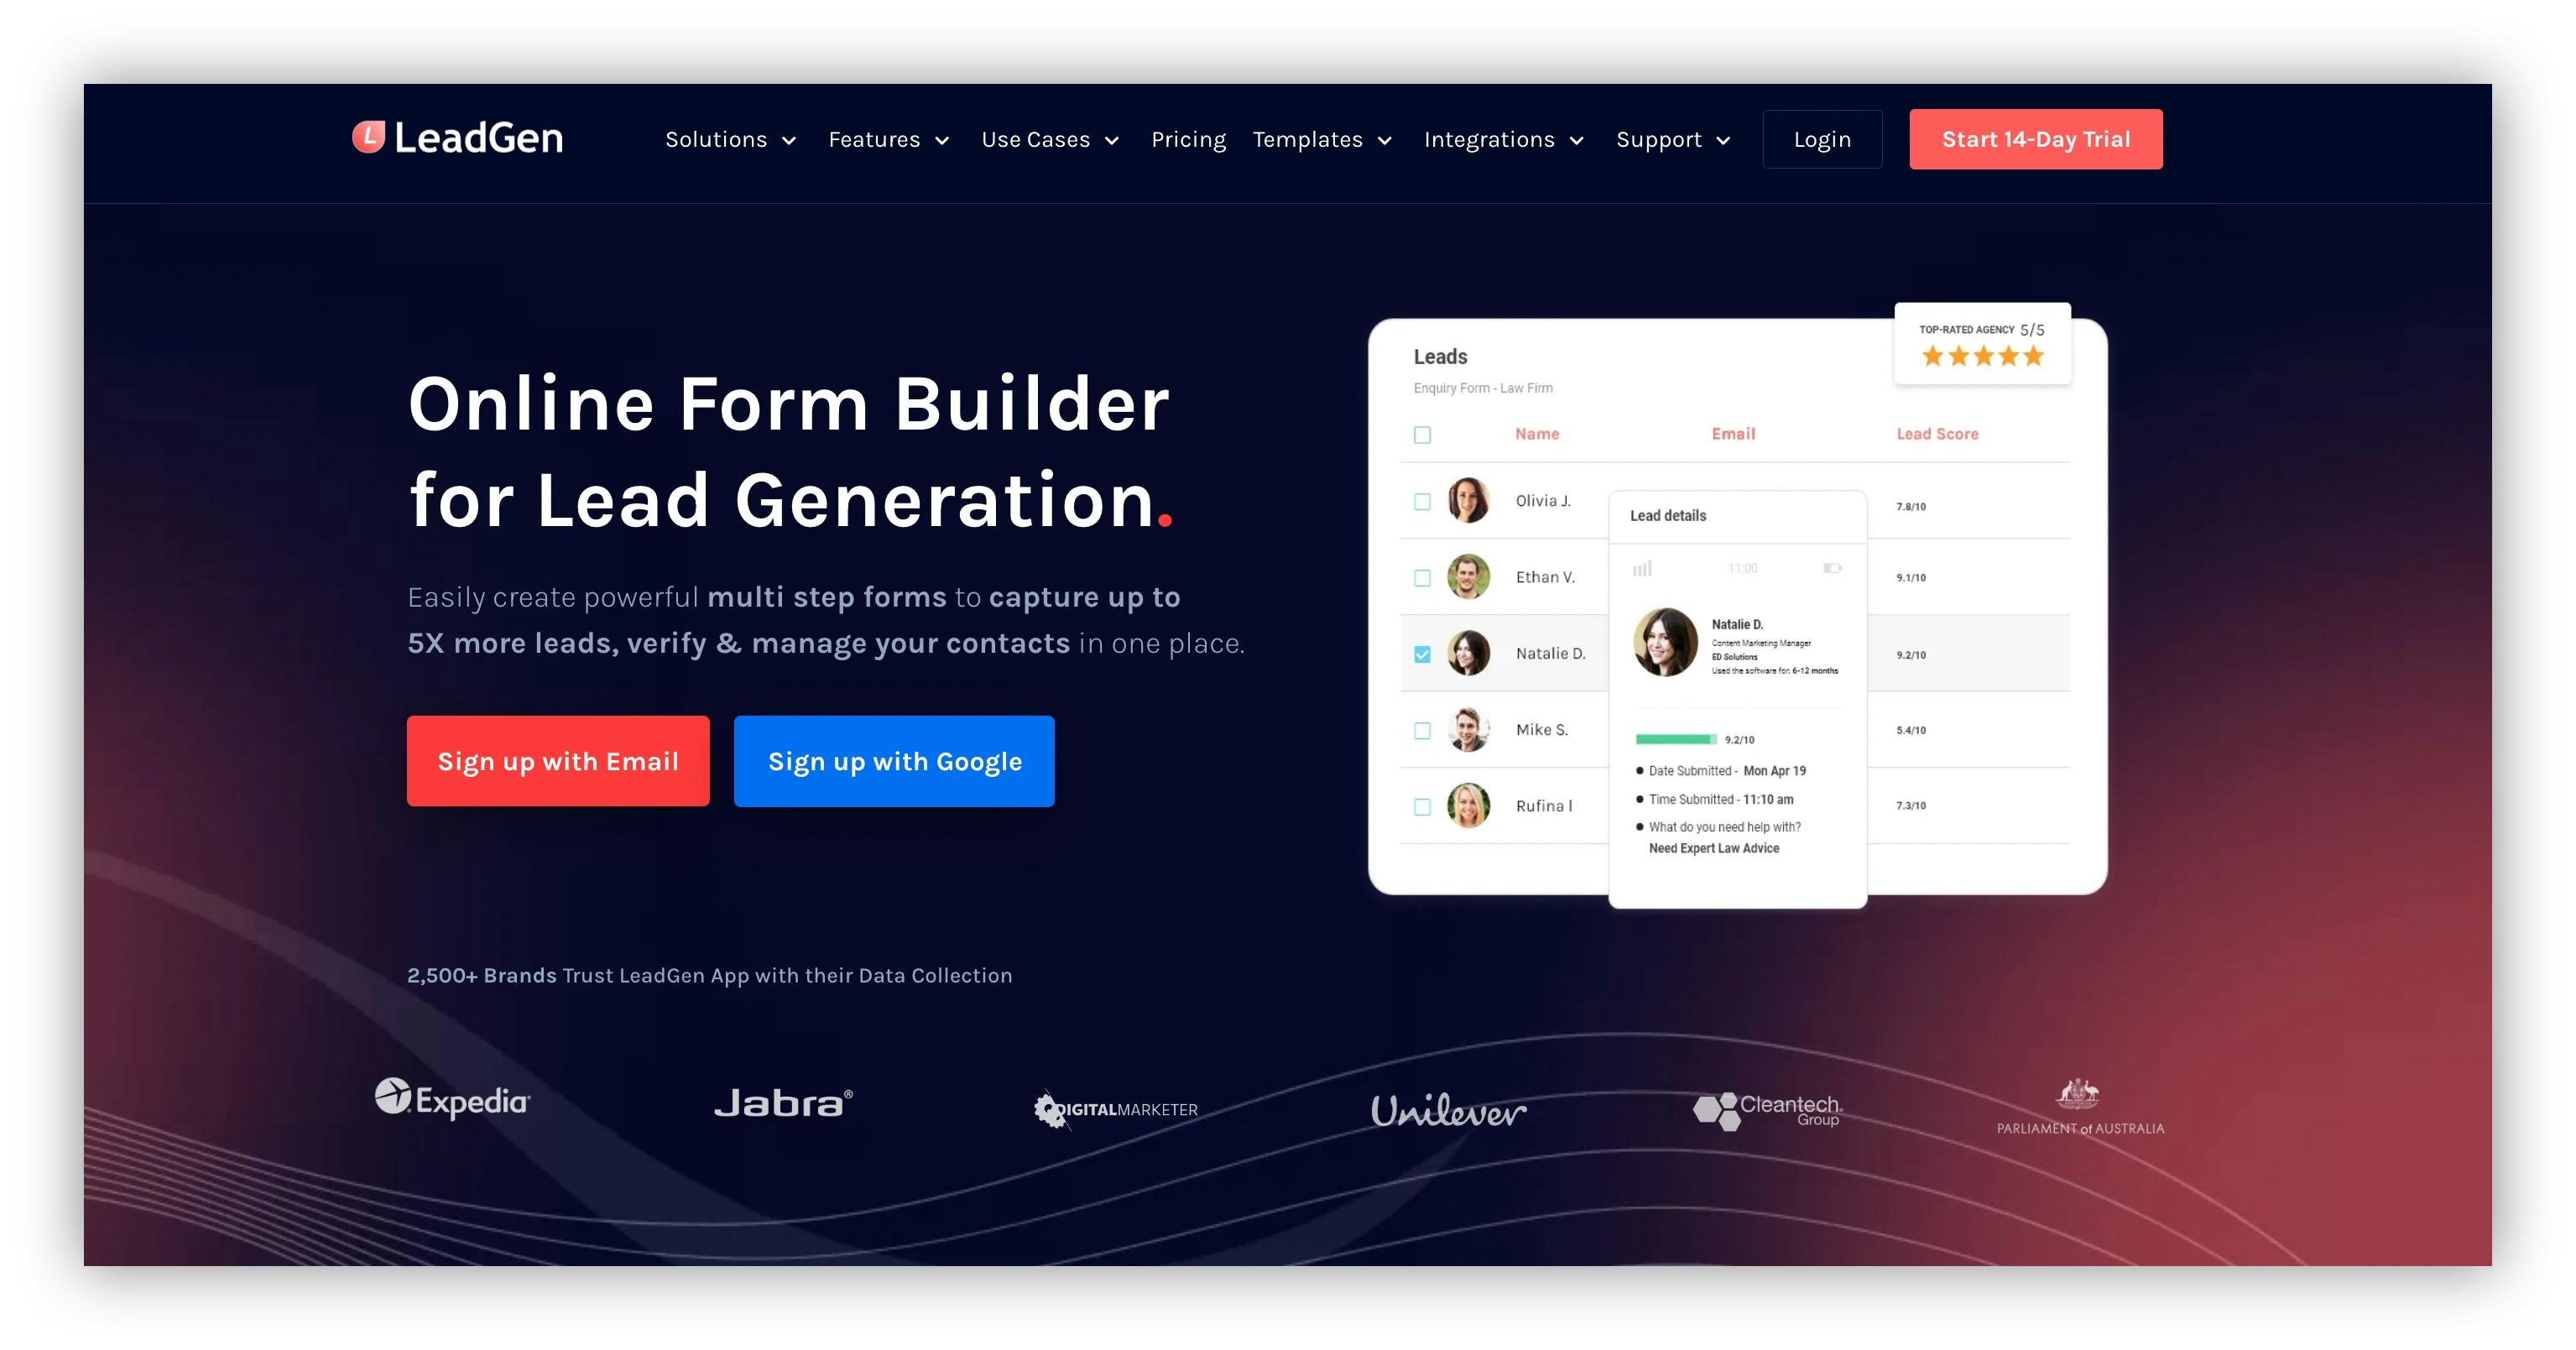 LeadGen is an online form builder tool that is used to generate leads.